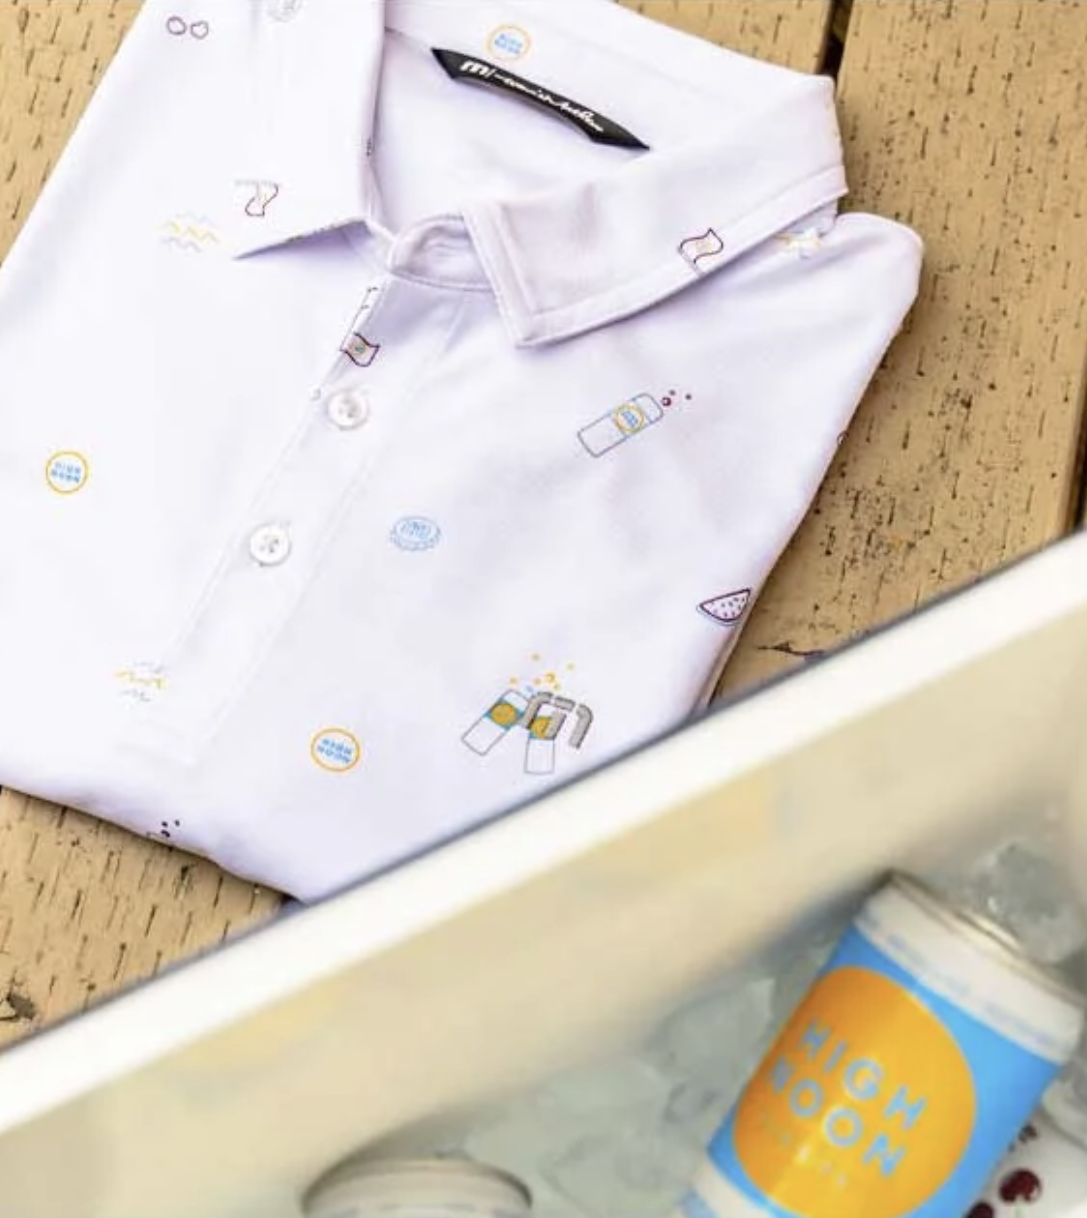 High Noon Hard Seltzer and TravisMathew introduce limited-edition apparel collaboration